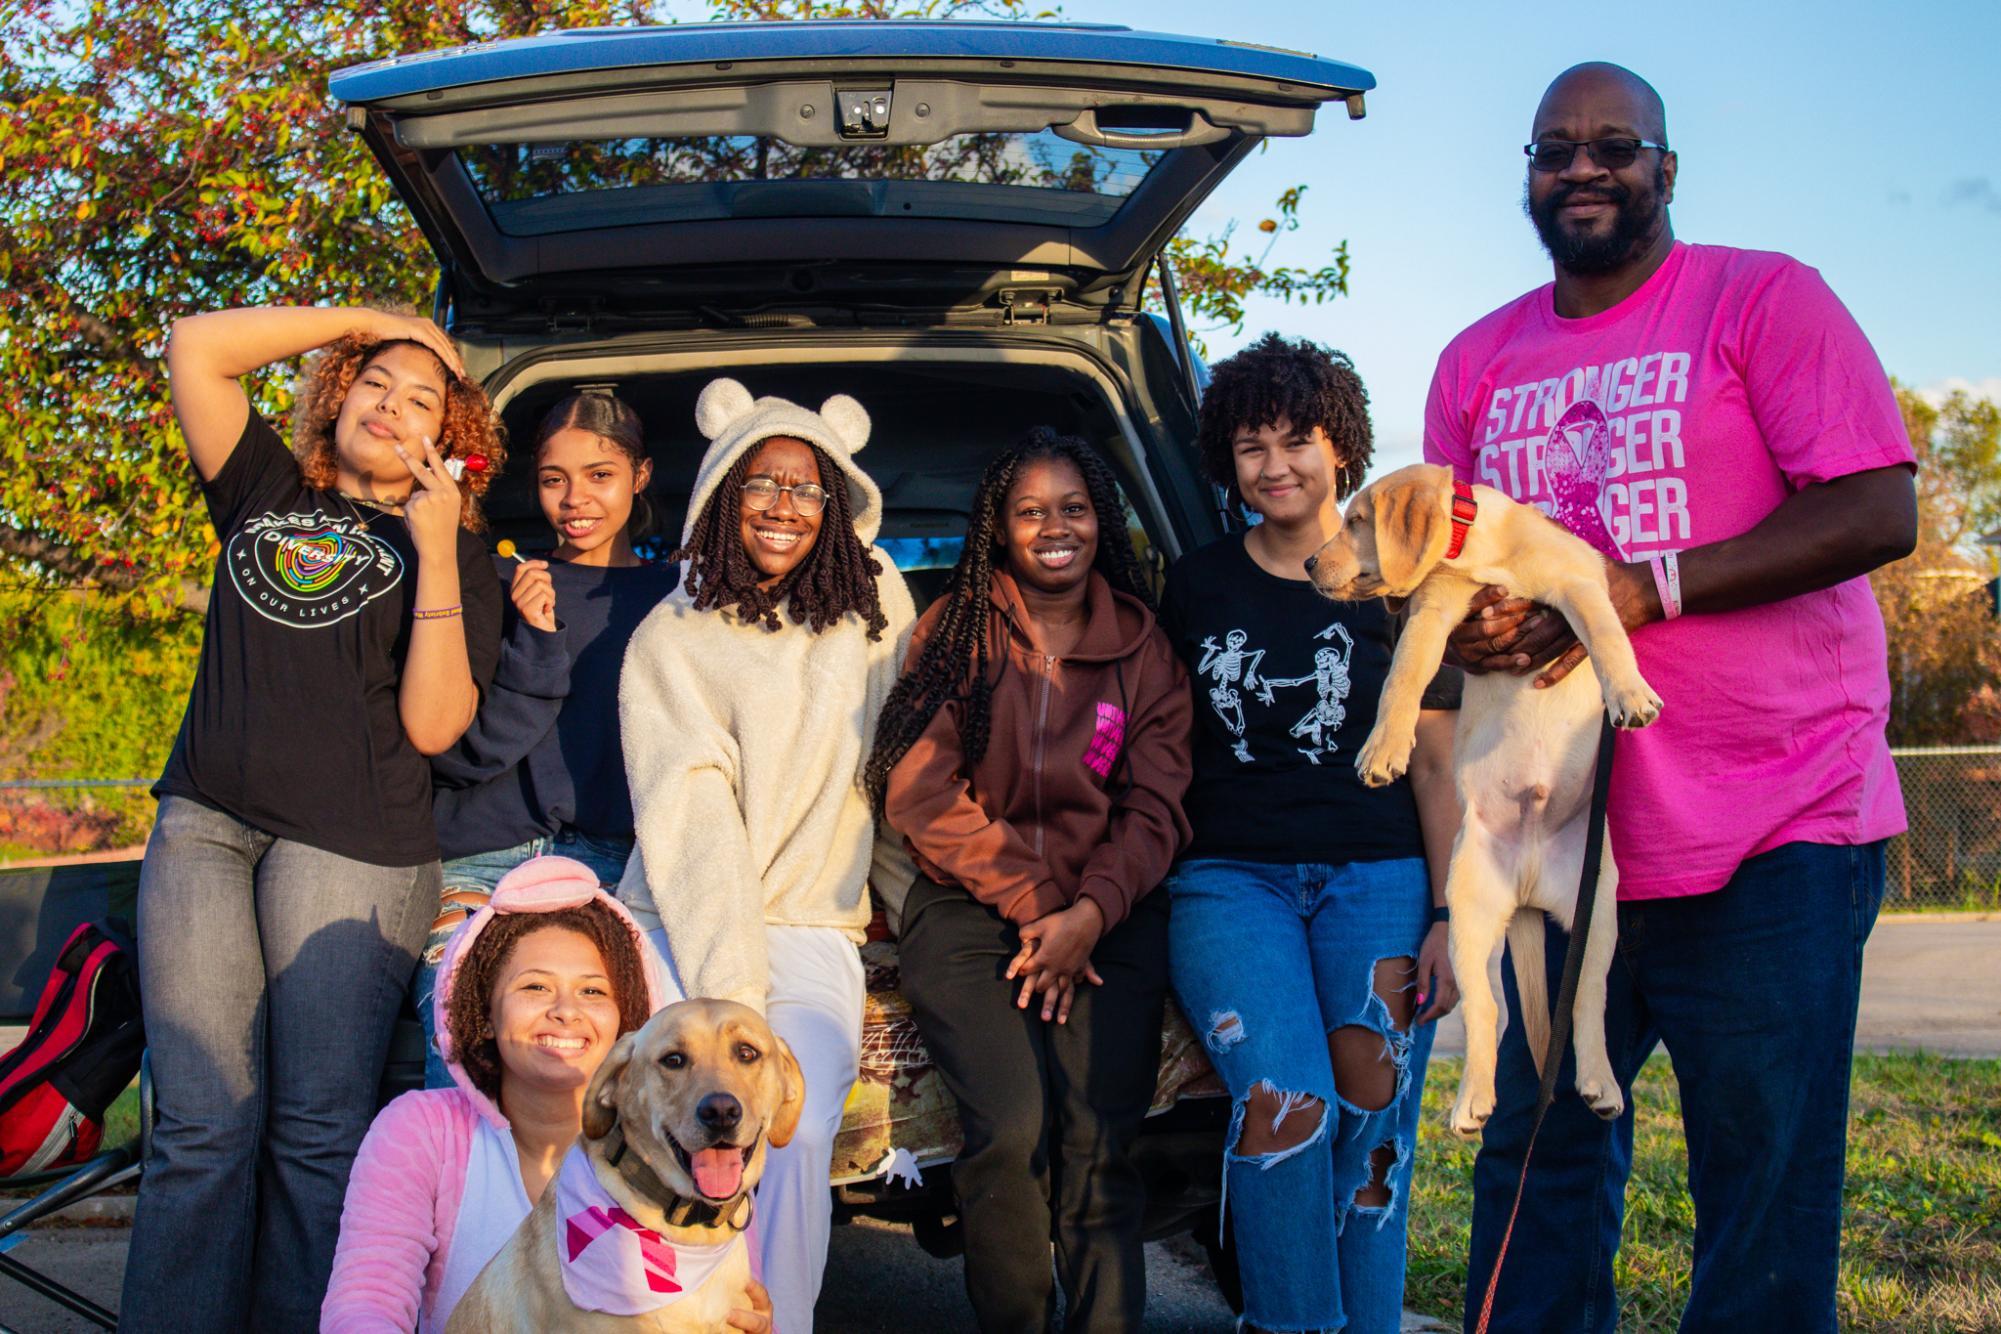 Security guard Demetrius Kemp poses with Free state therapy dog Wayne and new addition Marlo along with students at the Trunk-or-Treat.